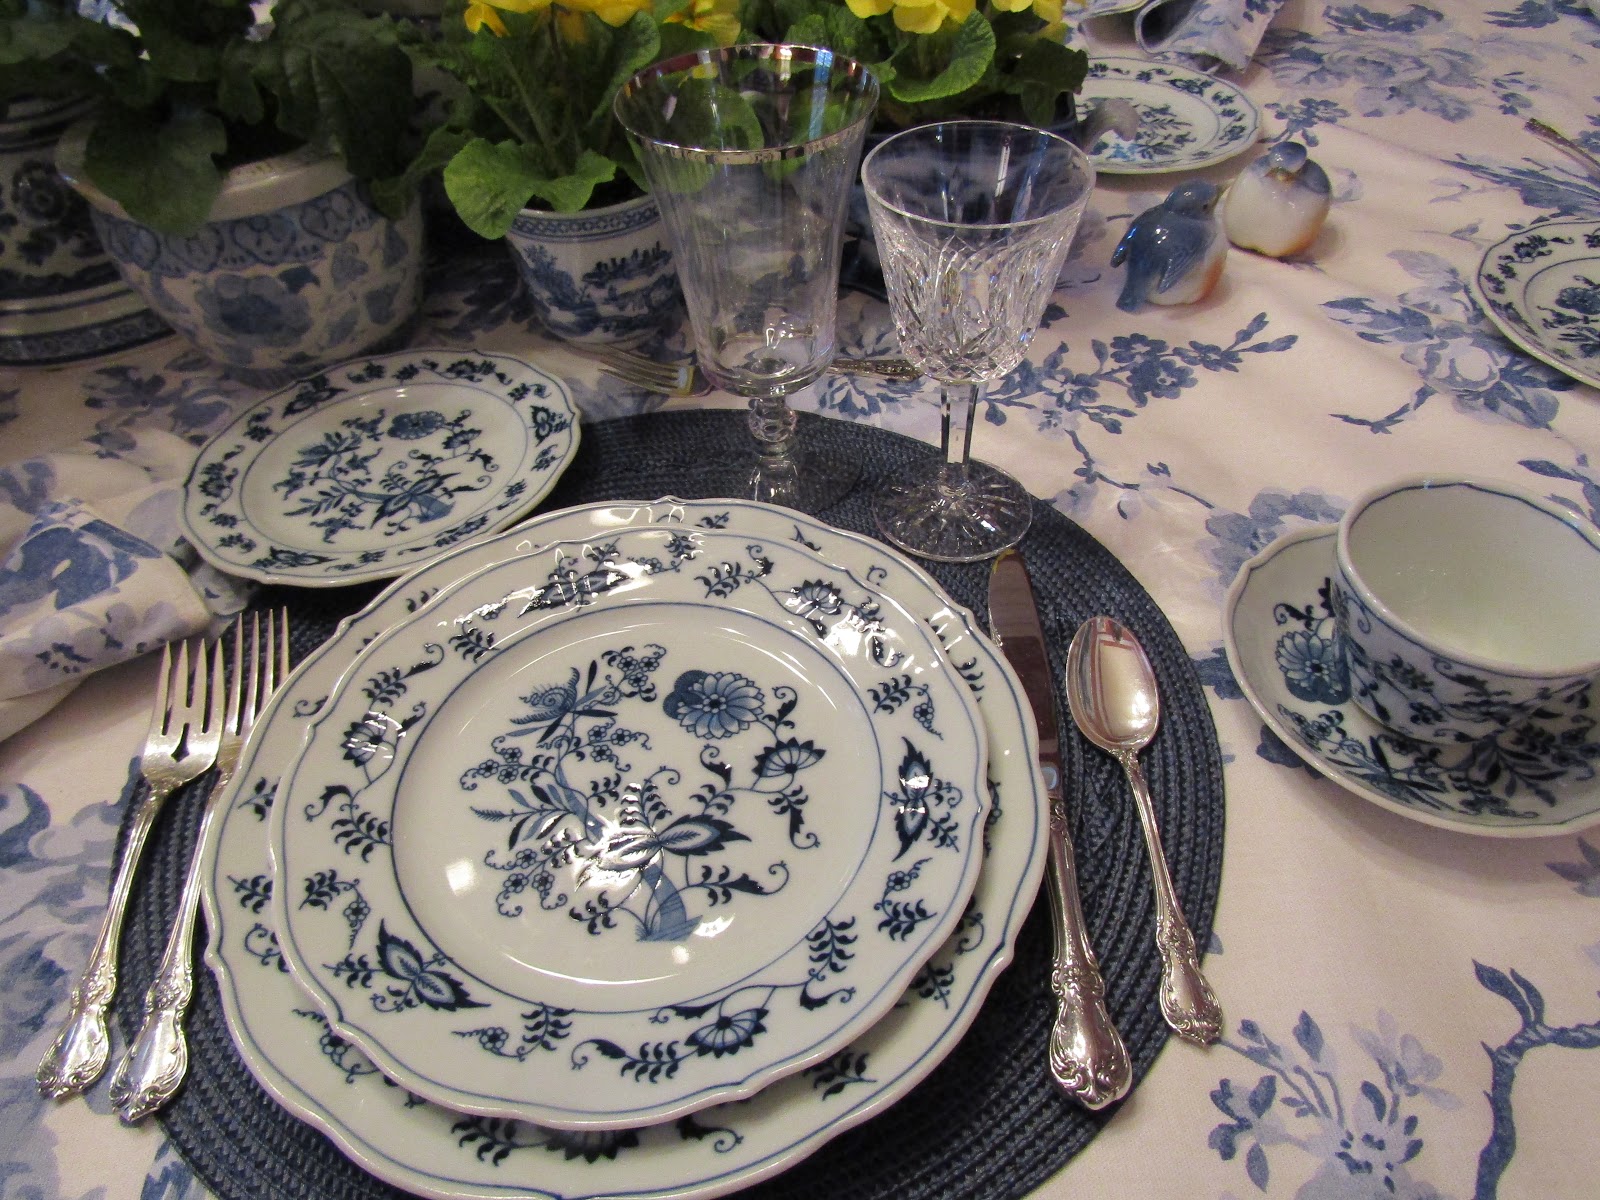 A Toile Tale: A Blue and Yellow Birthday